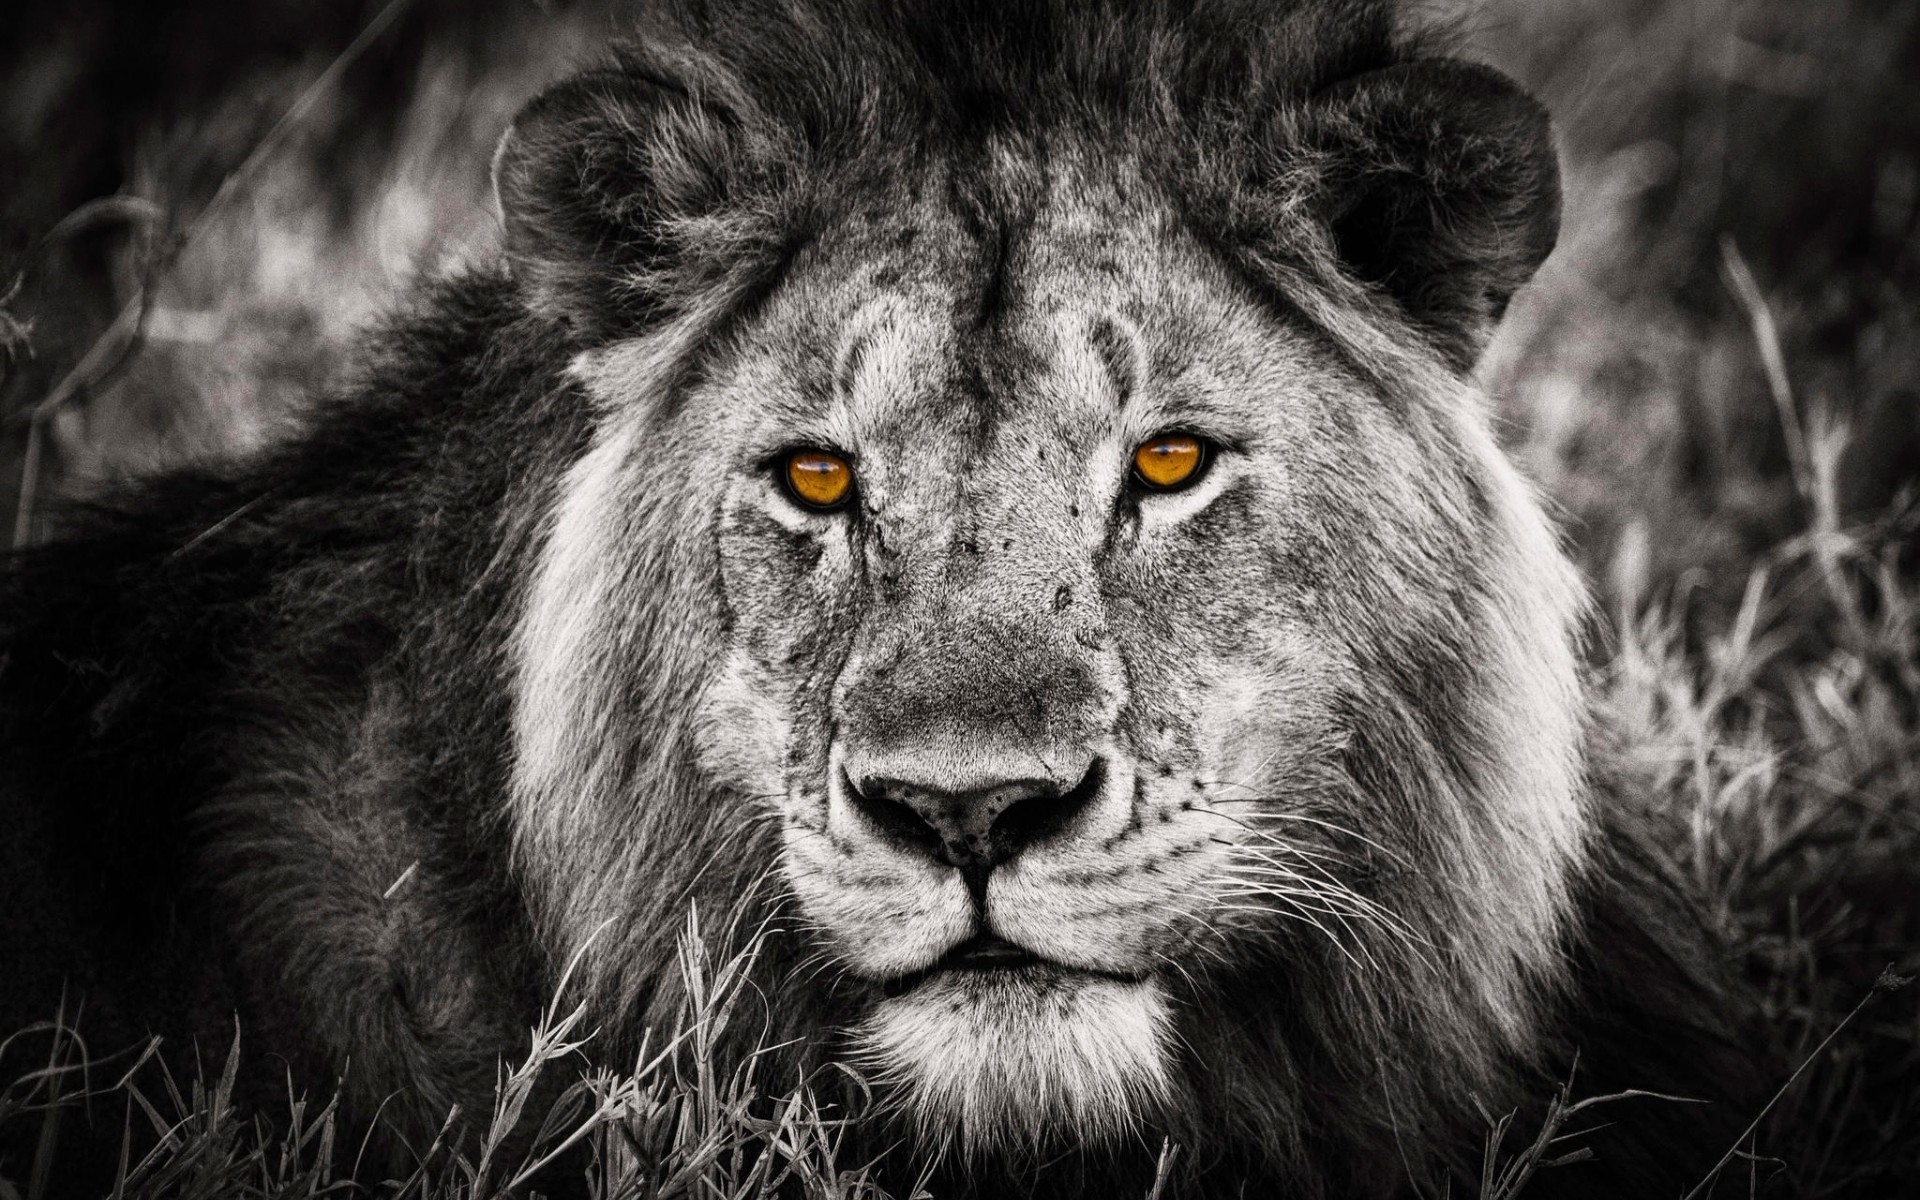  Black  and White  Lion  Portrait Phone wallpapers 